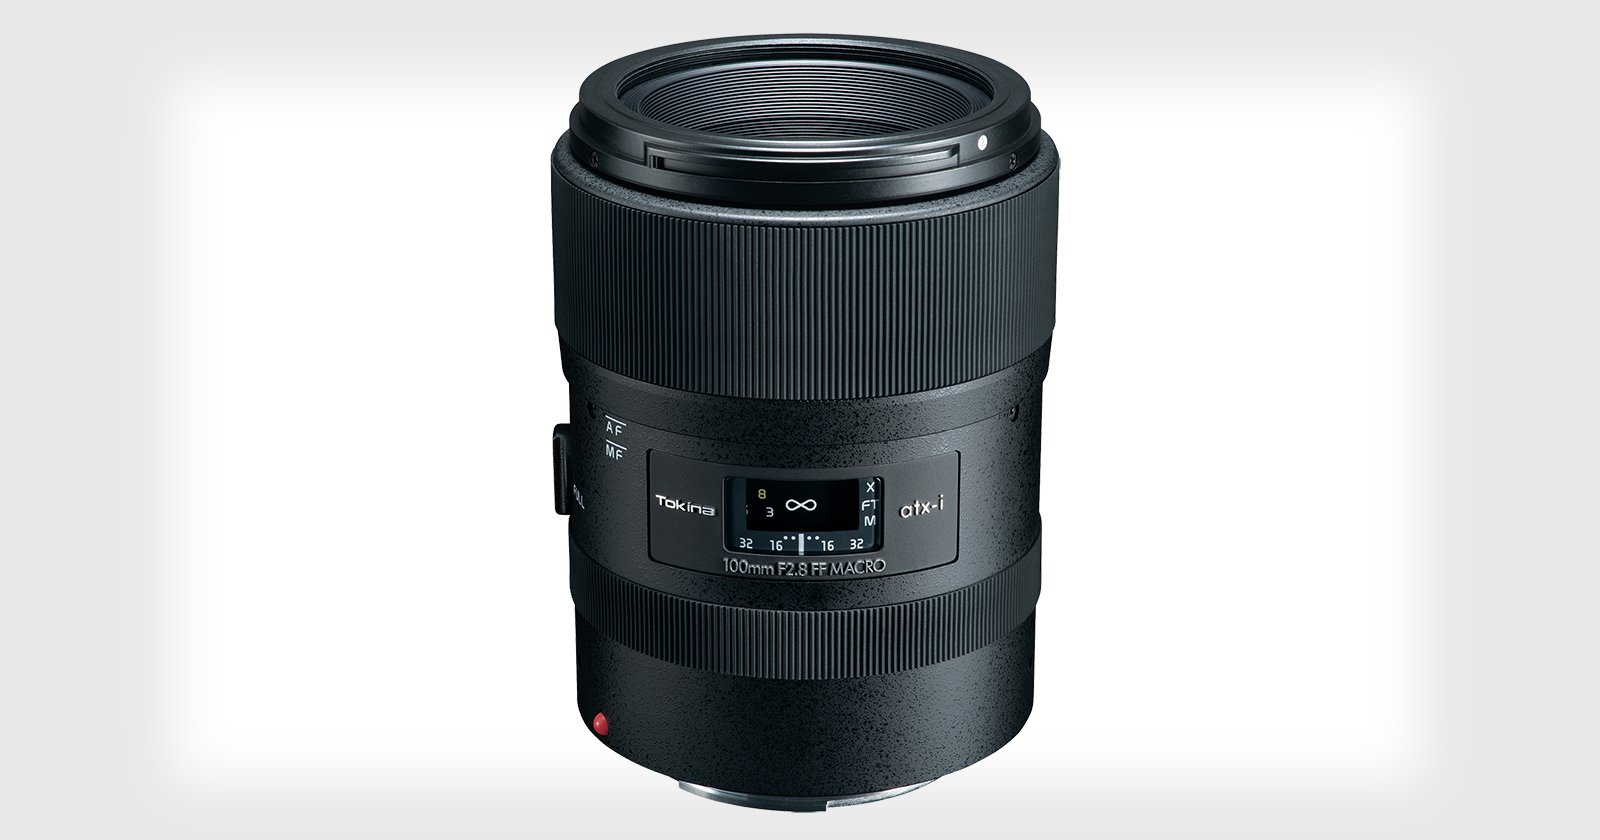 Tokina Unveils Updated 100mm f/2.8 Macro Lens for Canon and Nikon DSLRs